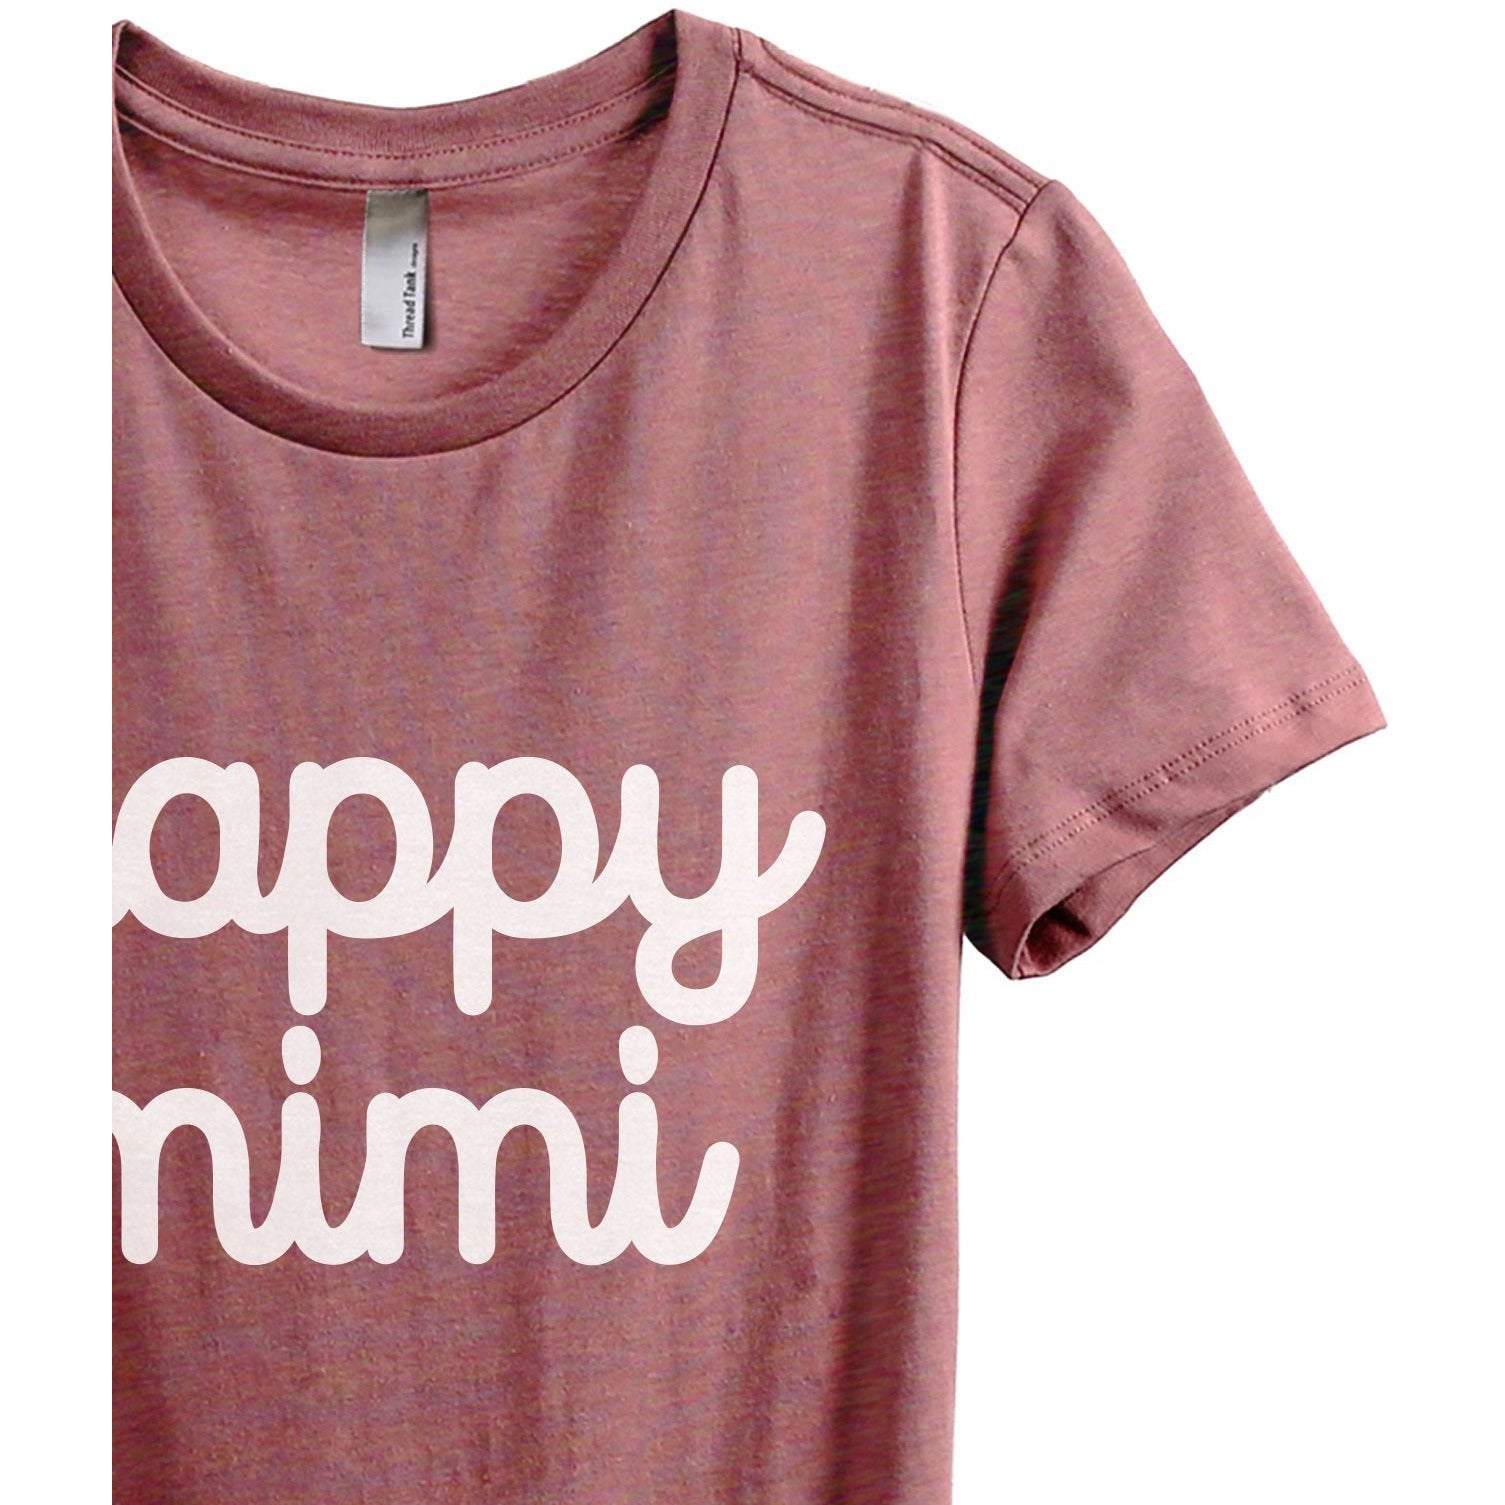 Happy Mimi Women's Relaxed Crewneck T-Shirt Top Tee Heather Rouge